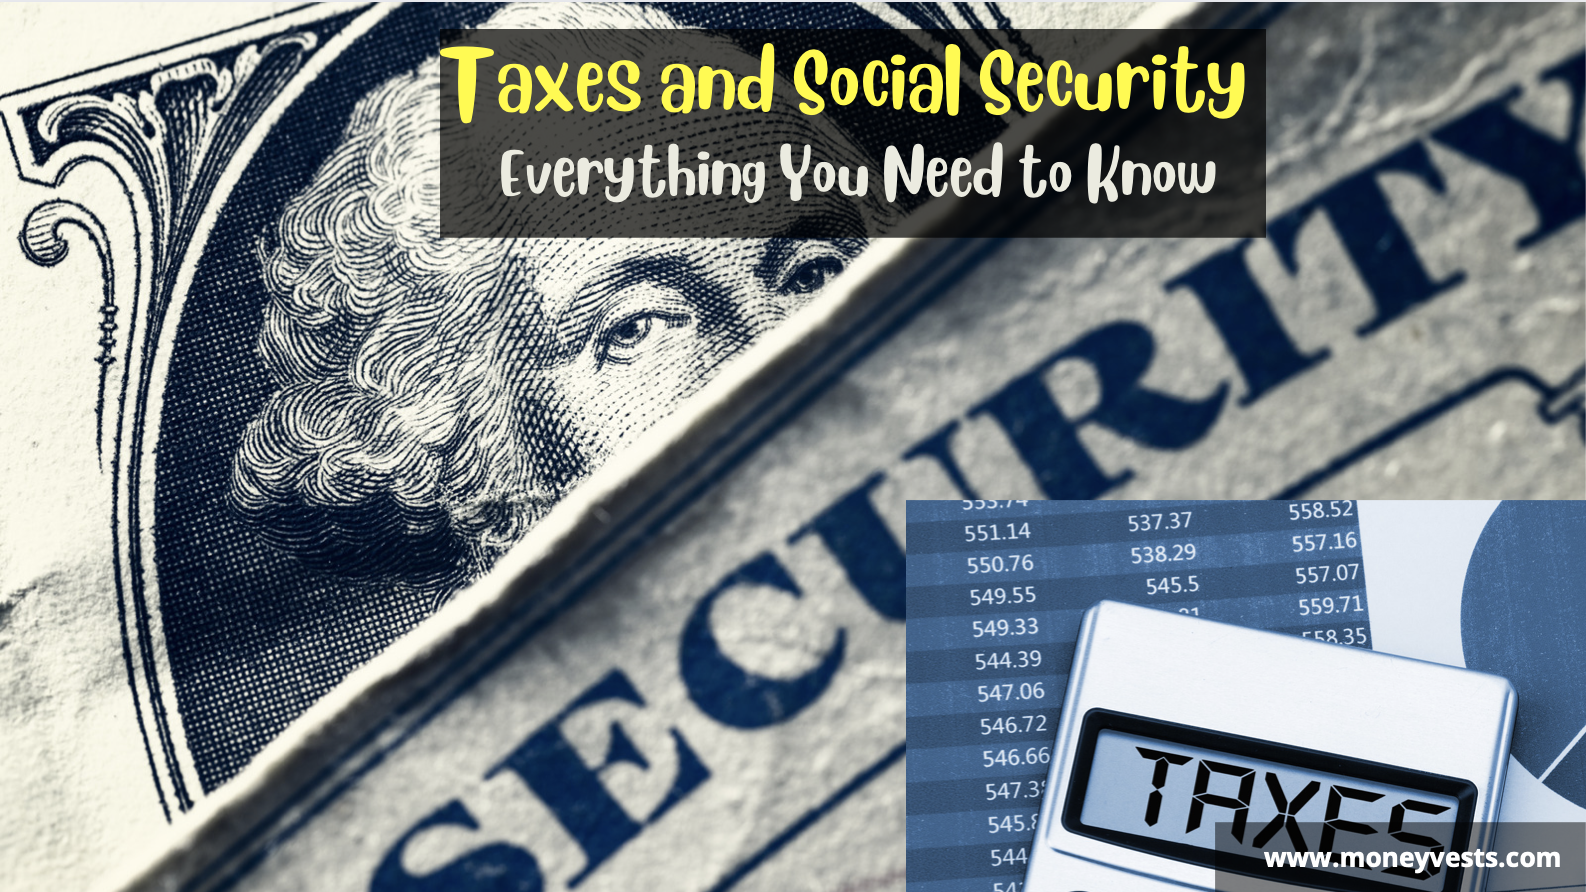 Taxes and Social Security - Everything You Need to Know